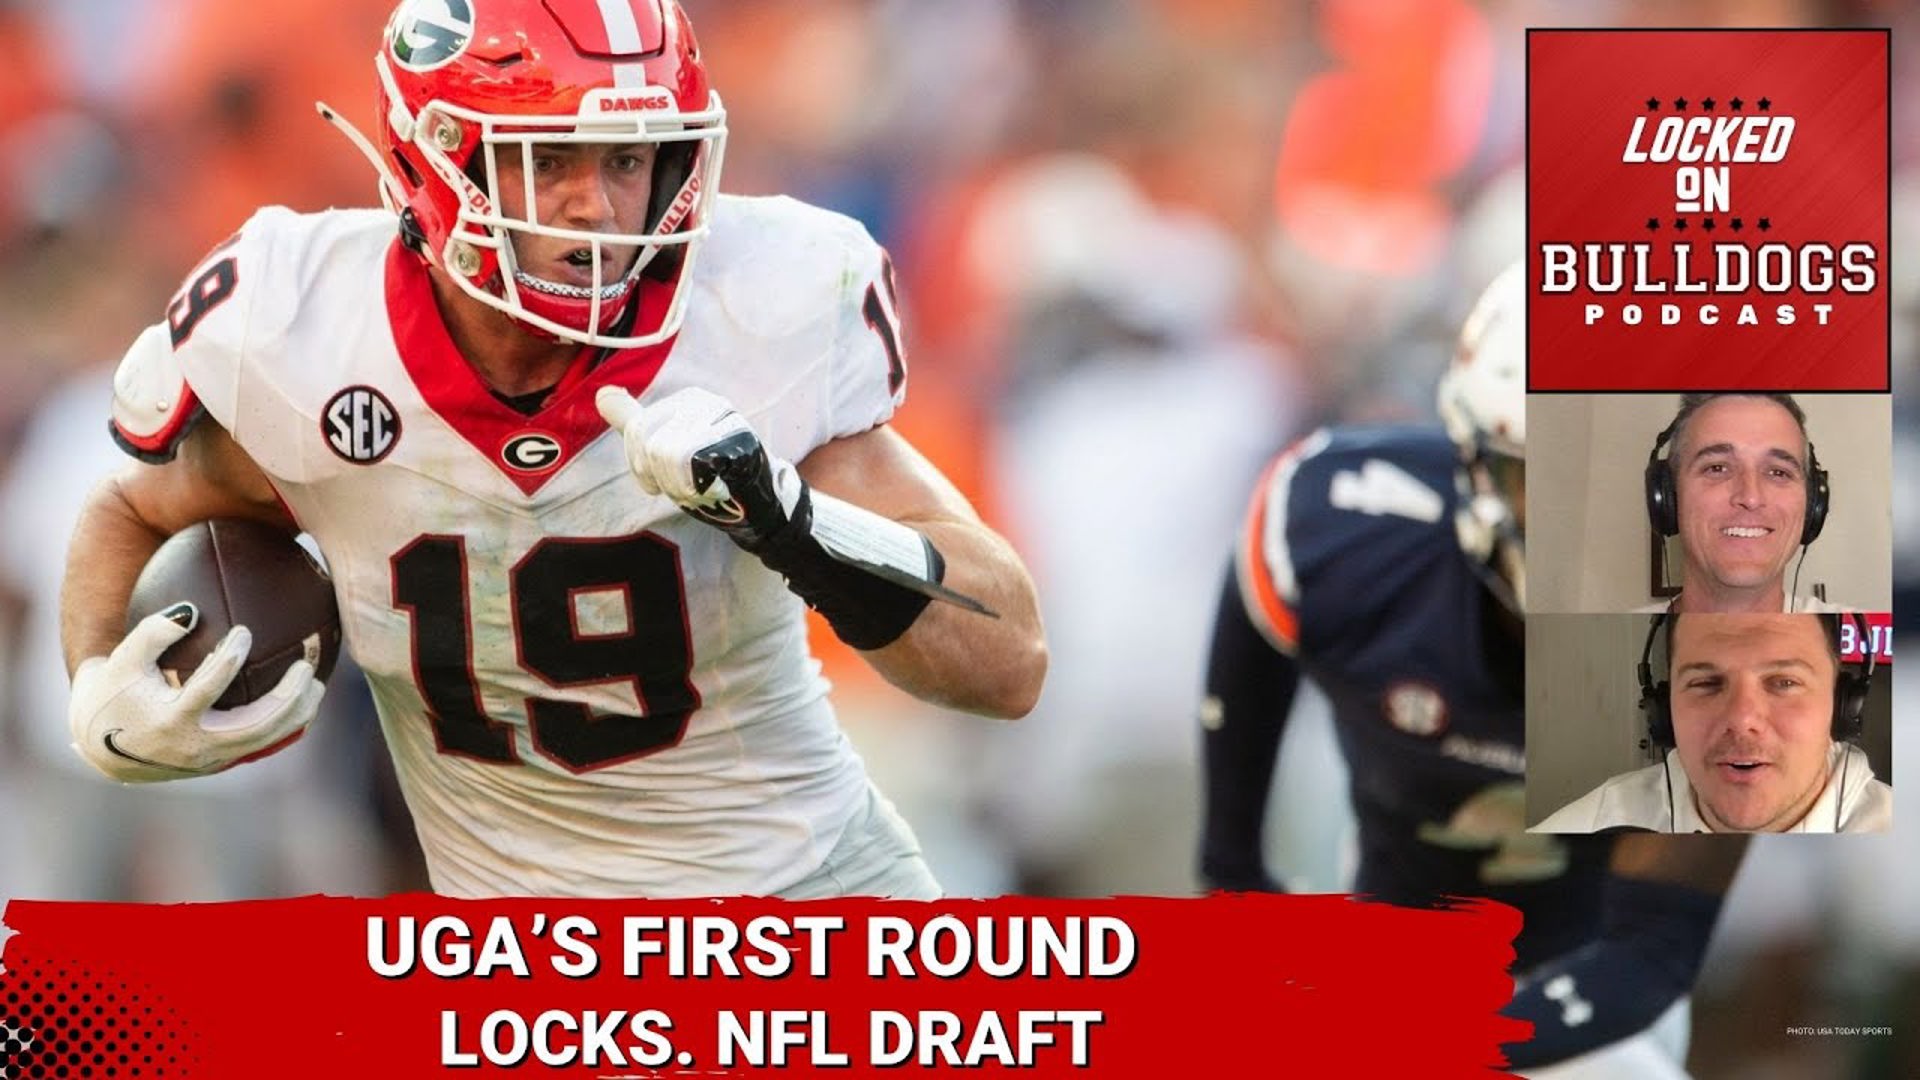 Georgia Football always shines in the NFL Draft. Who will go in round 1 this year??